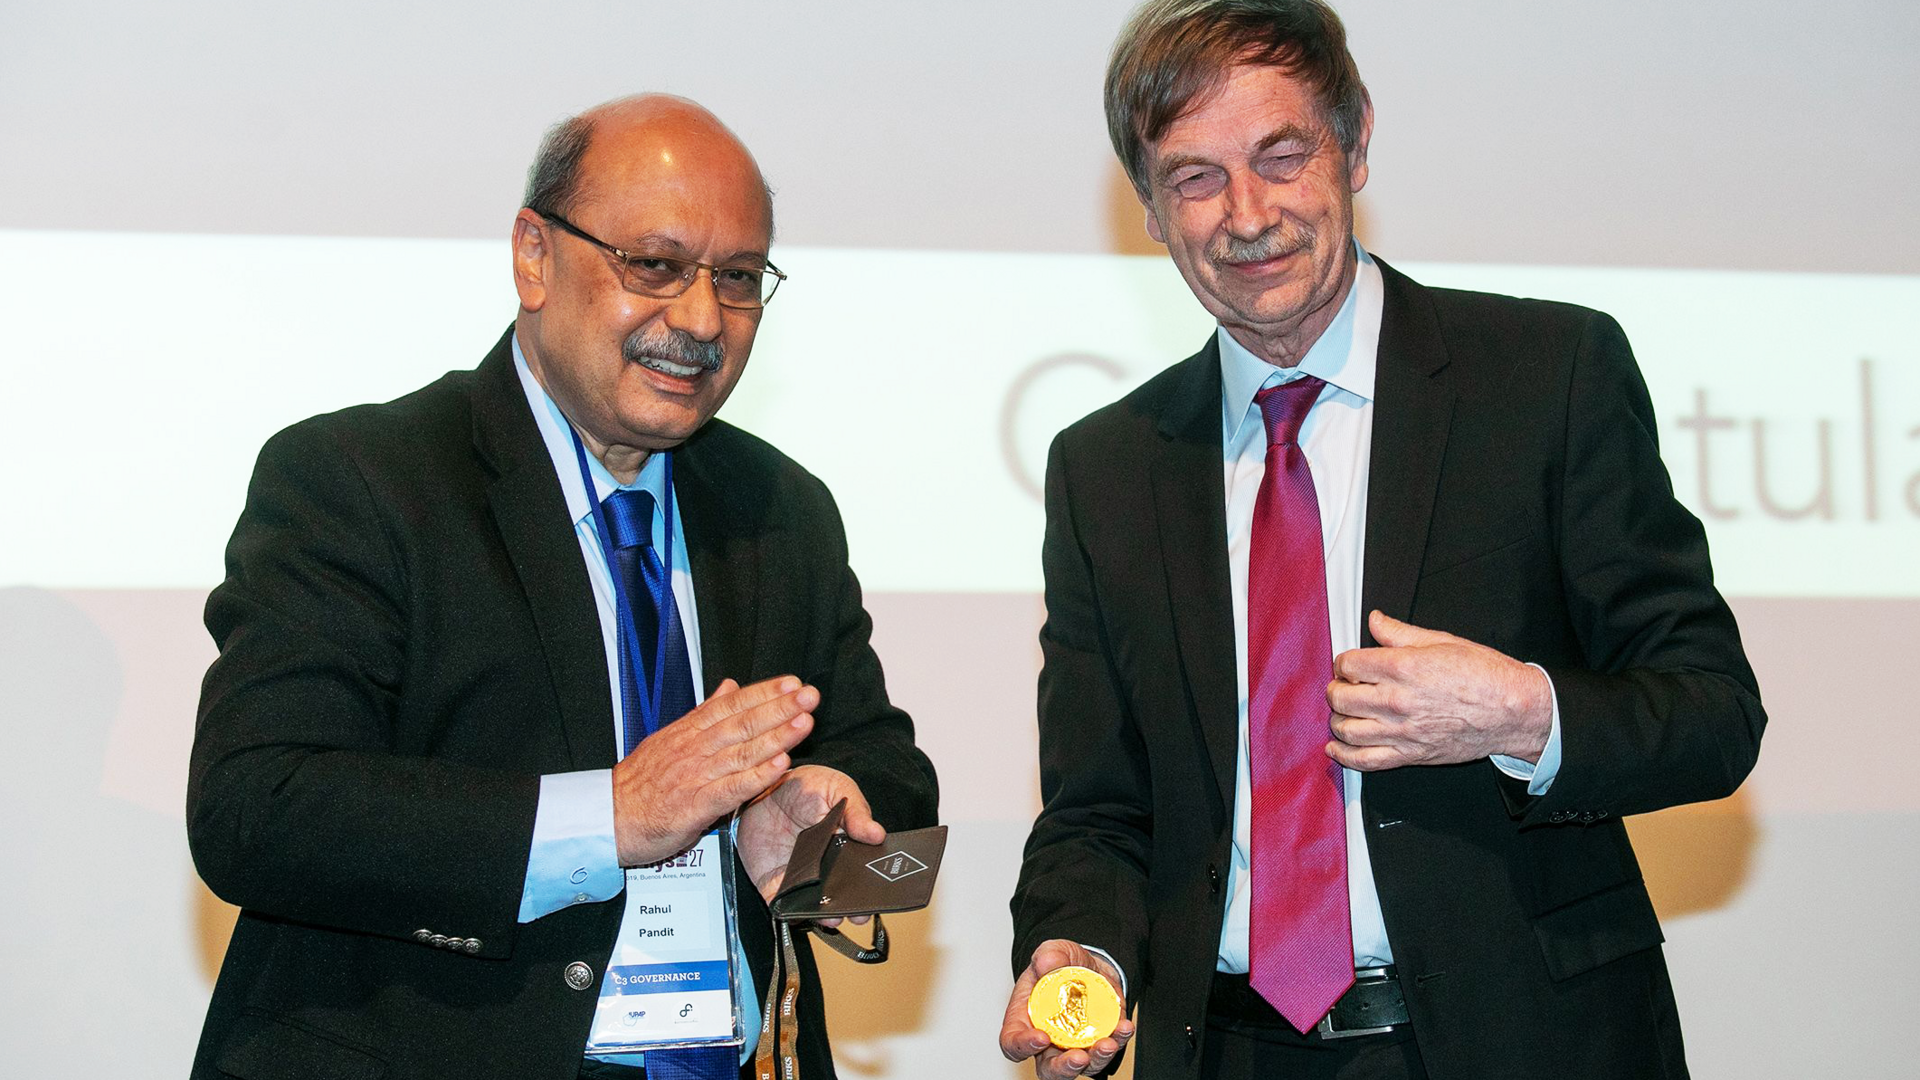 Prof. Rahul Pandit (l.), Chairman of the IUPAP Commission for Statistical Physics, presented the Boltzmann Medal to Prof. em. Herbert Spohn (r.) in Buenos Aires. 